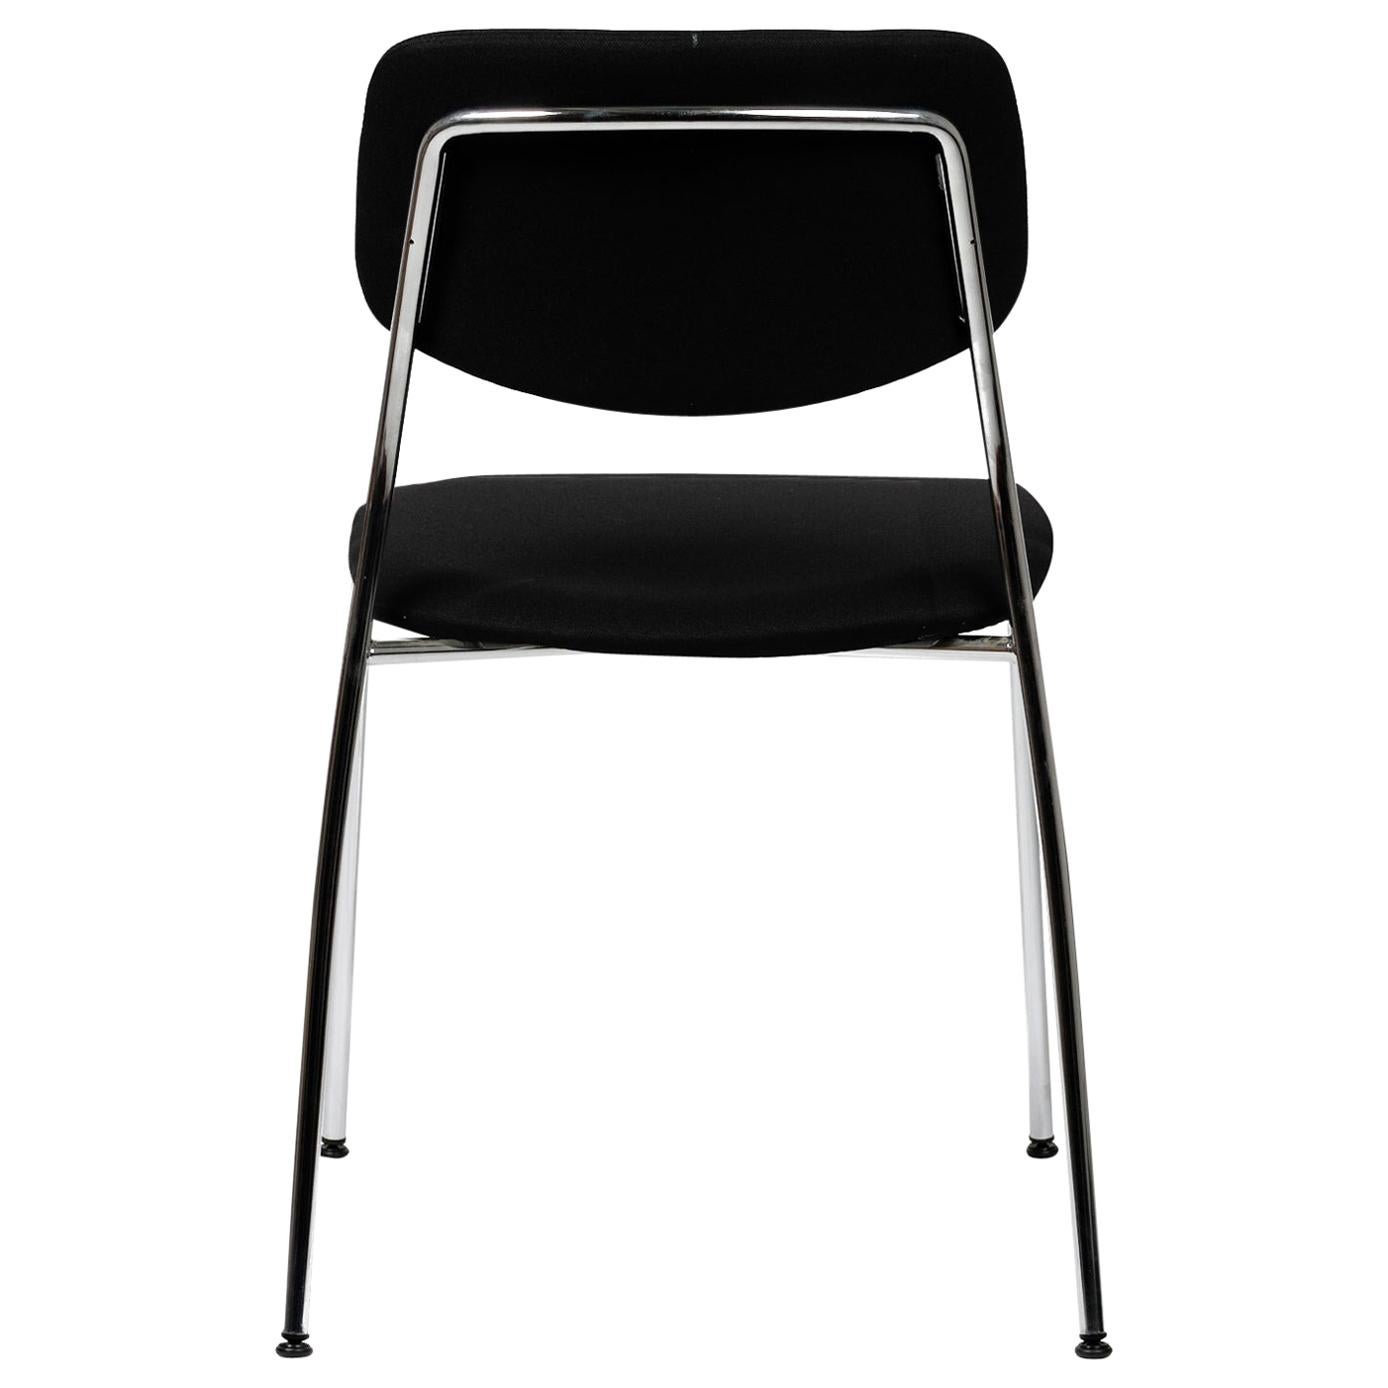 The Felber C14 is a reedition of a 1940s Classic Dietiker chair. The chair which was at first developed as a simple wooden chair in the early 40s, has been reengineered into a modular patented program. The innovative concept of the Felber series is